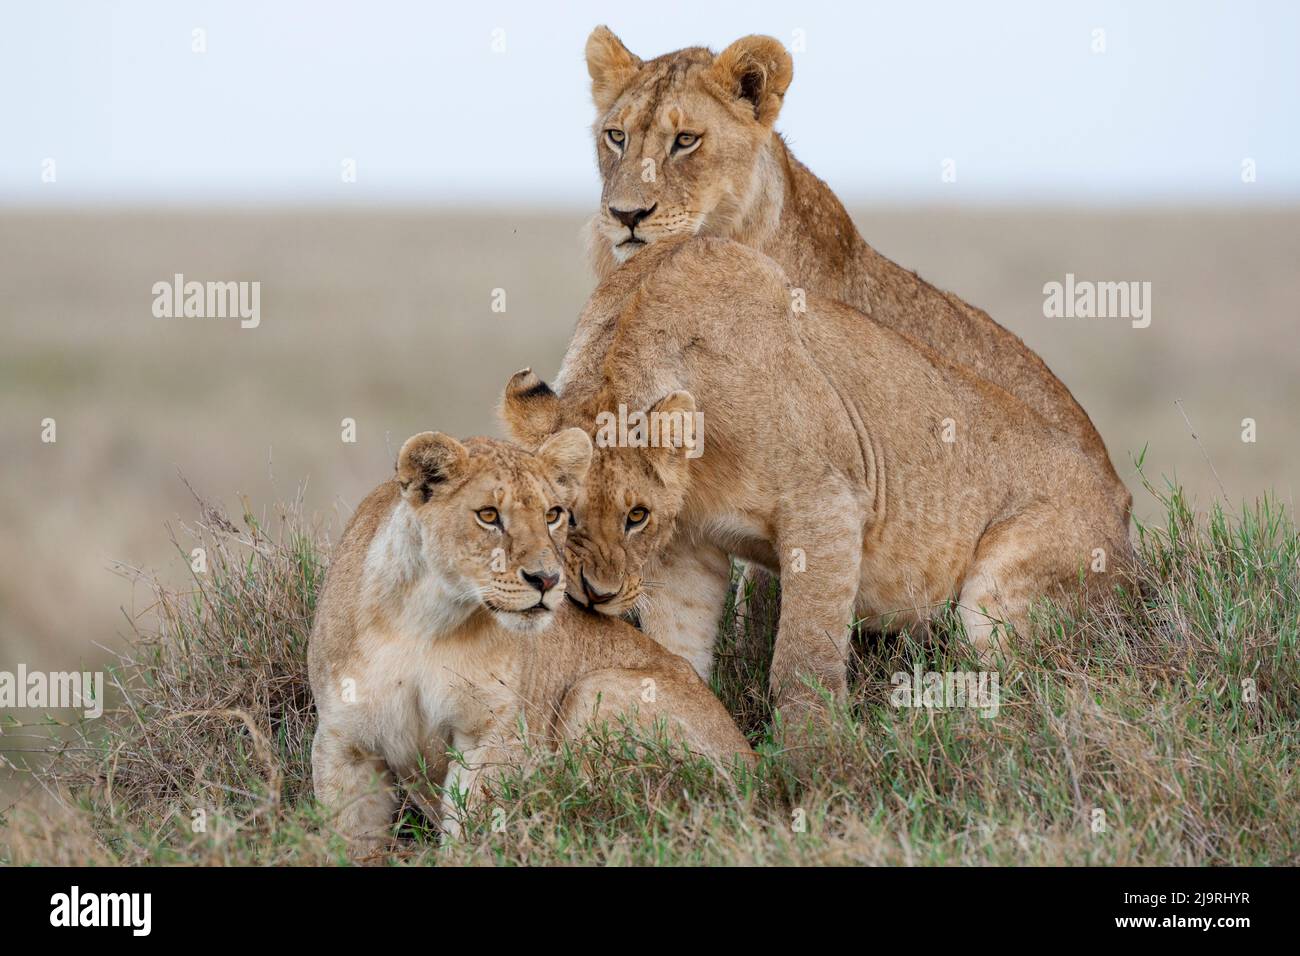 Africa, Tanzania. A lioness sits with her two cubs. Stock Photo